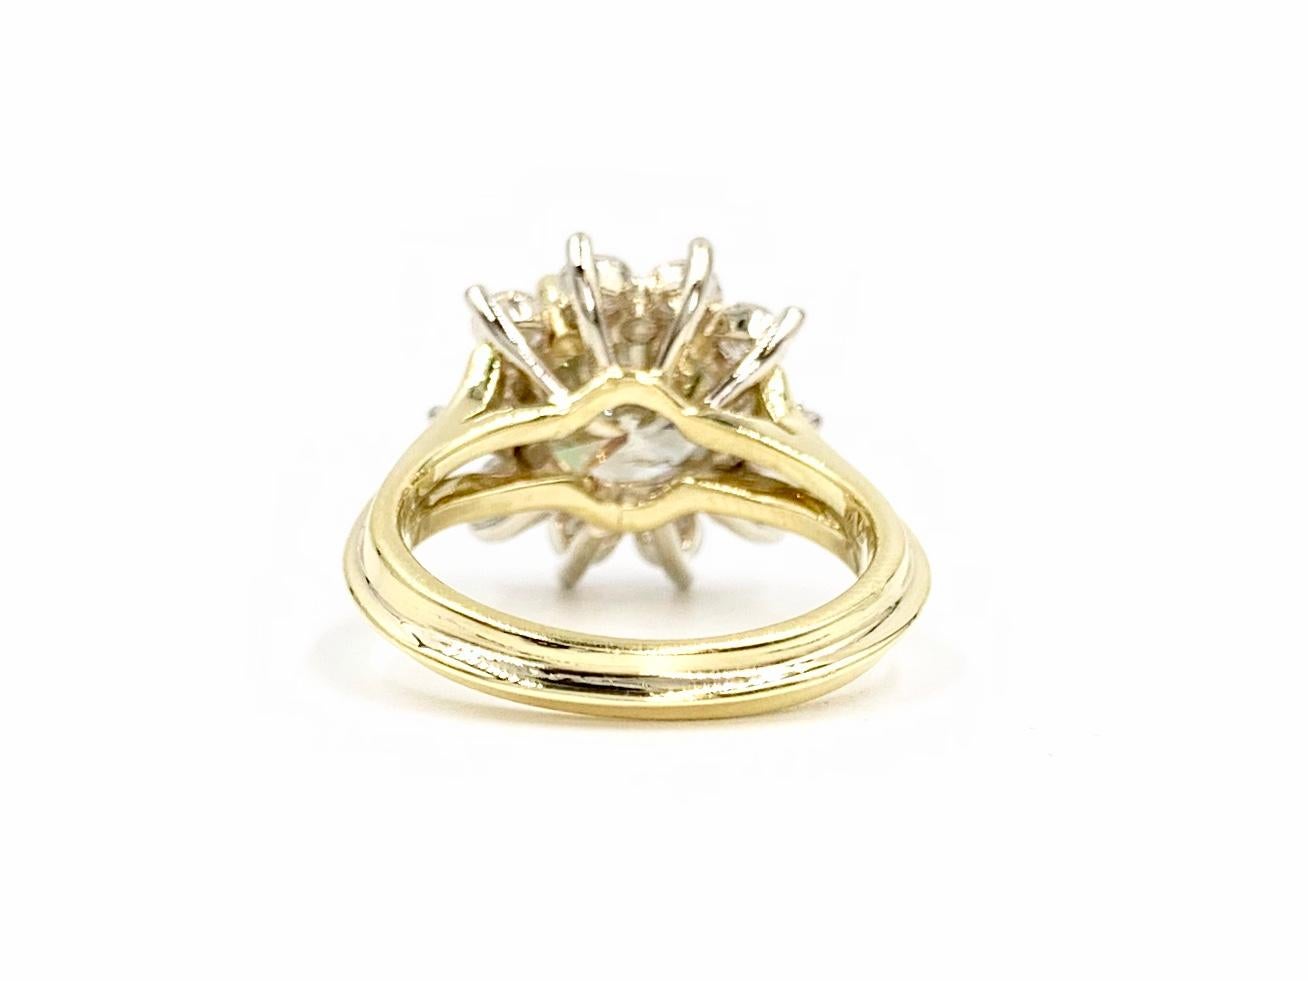 Priced to sell! A timeless and elegant 18 karat yellow gold halo ring featuring a 2.51 carat champagne/bronze round brilliant diamond center surrounded by 10 round brilliant white diamonds at 1.50 carats total weight. Ring is designed with a